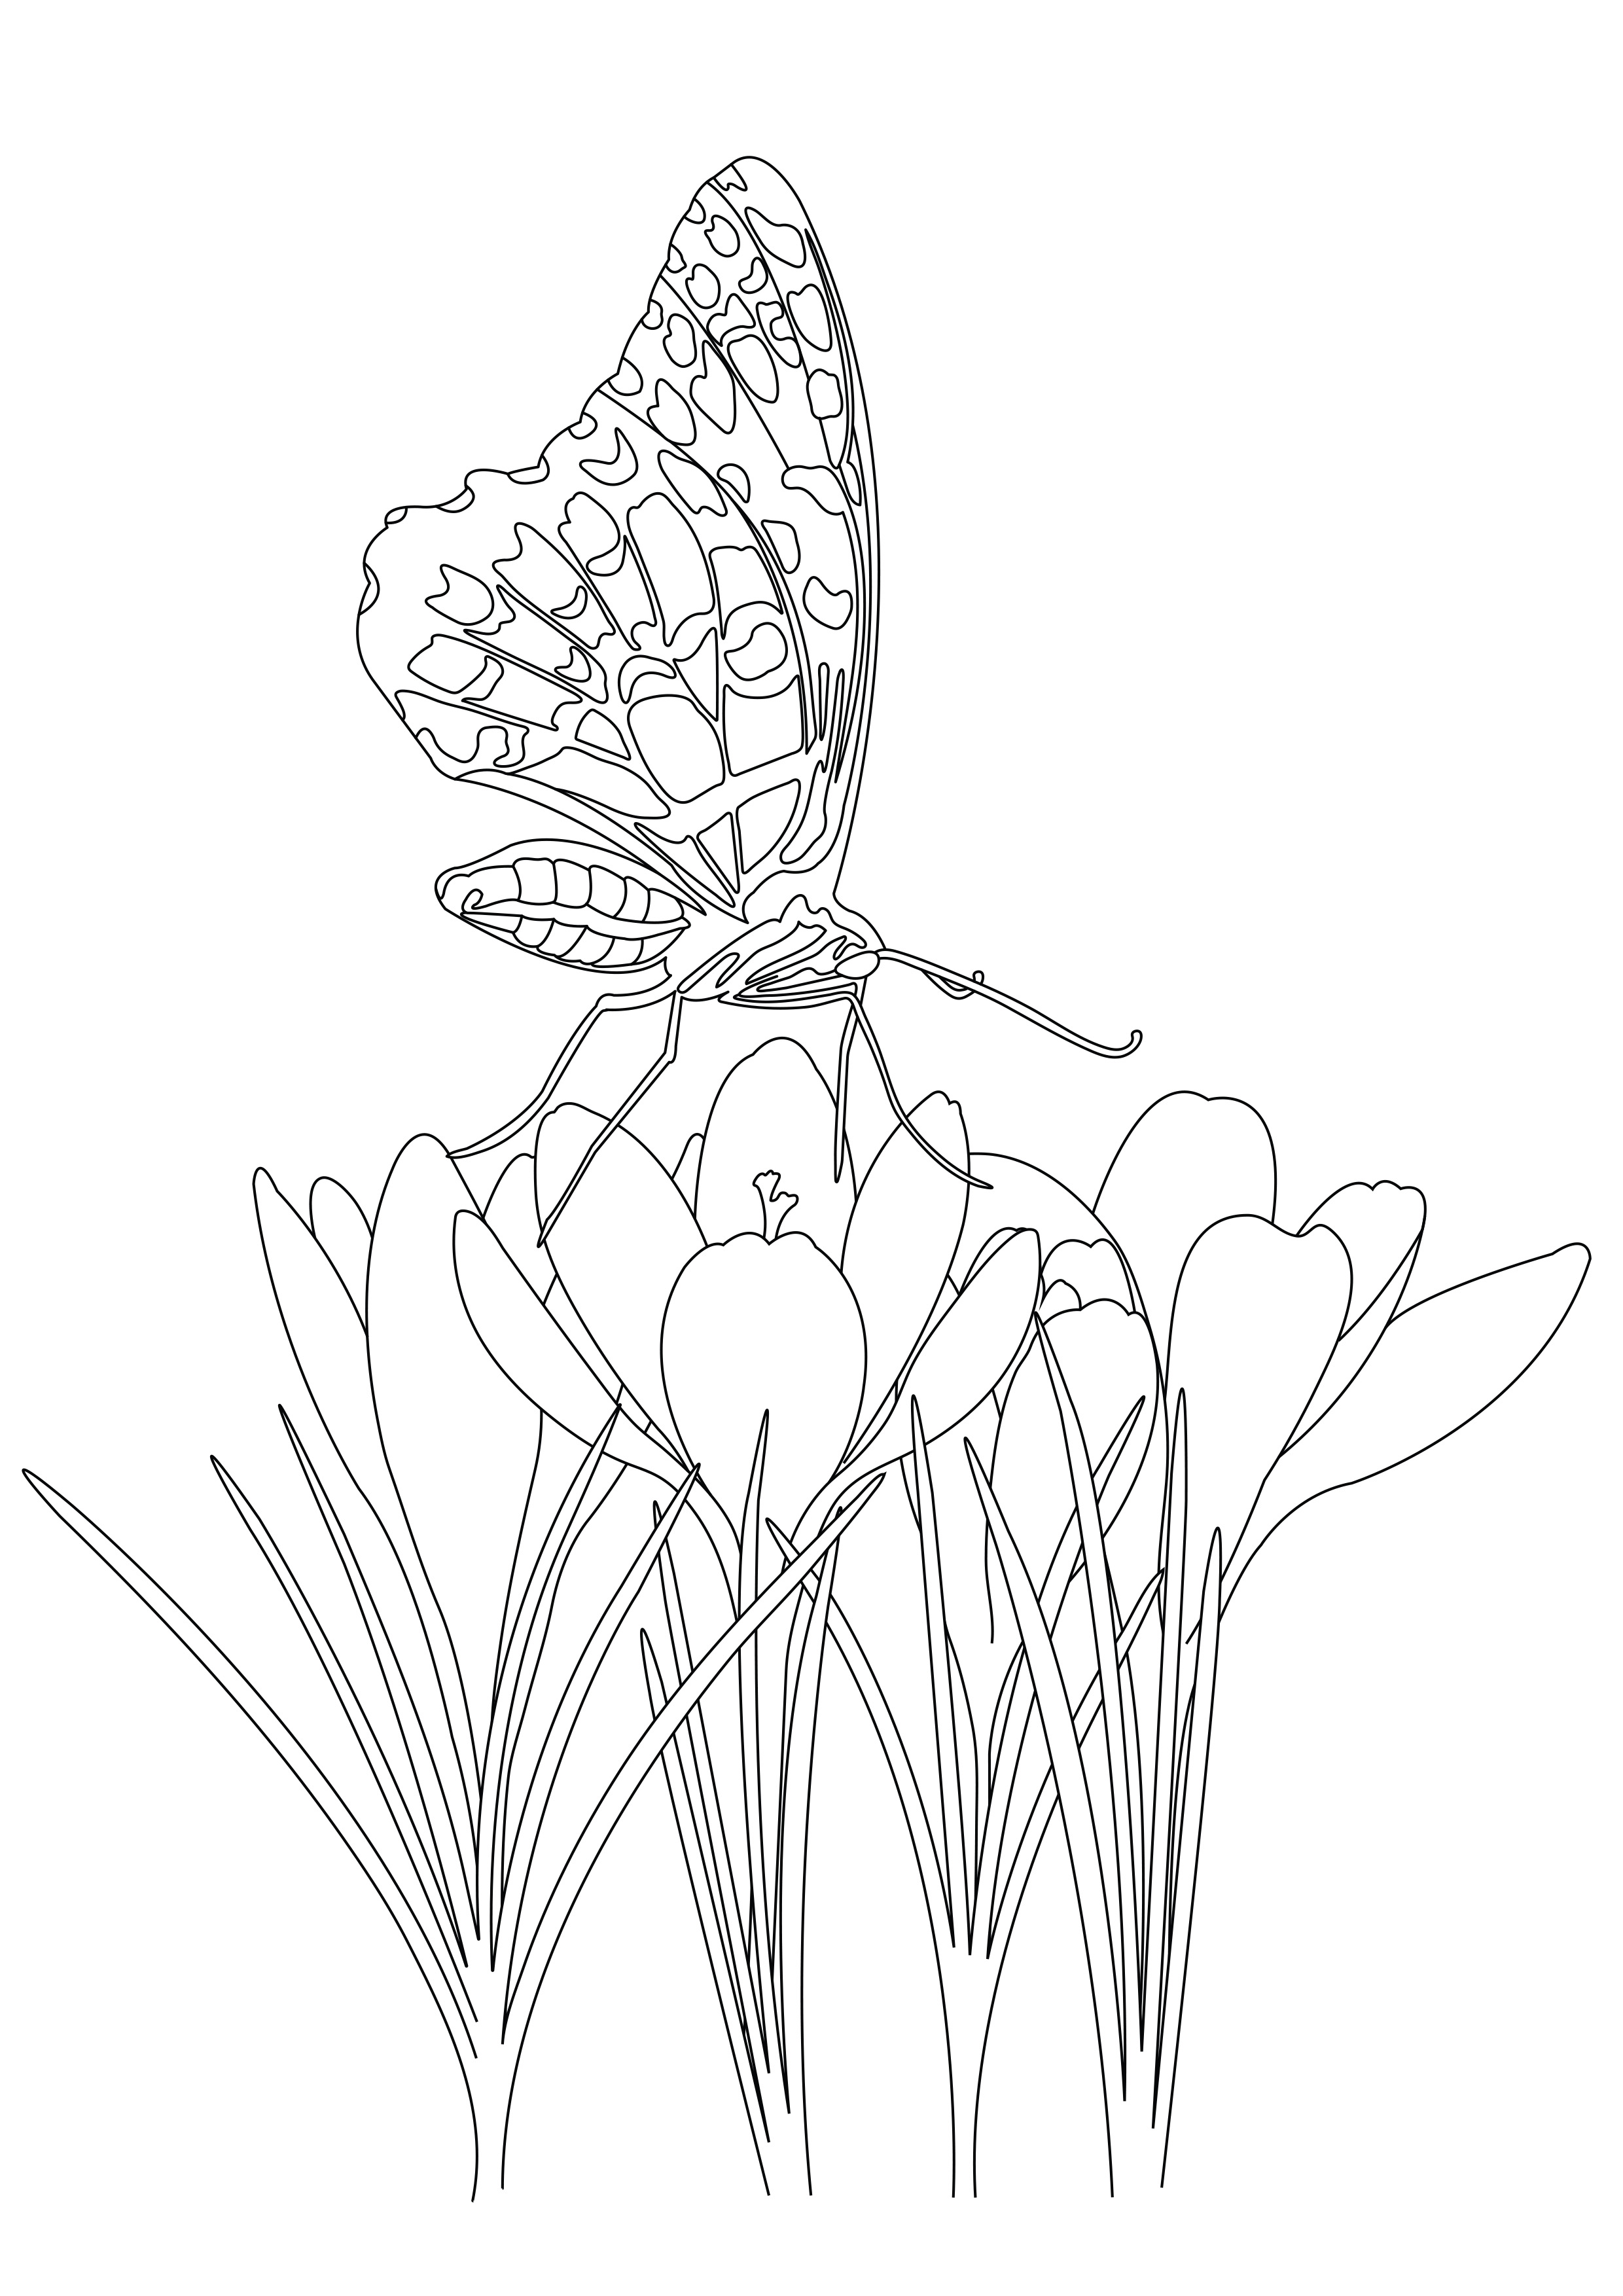 Butterfly under flowers, from the coloring book 'Butterfly garden', by Emma L Williams